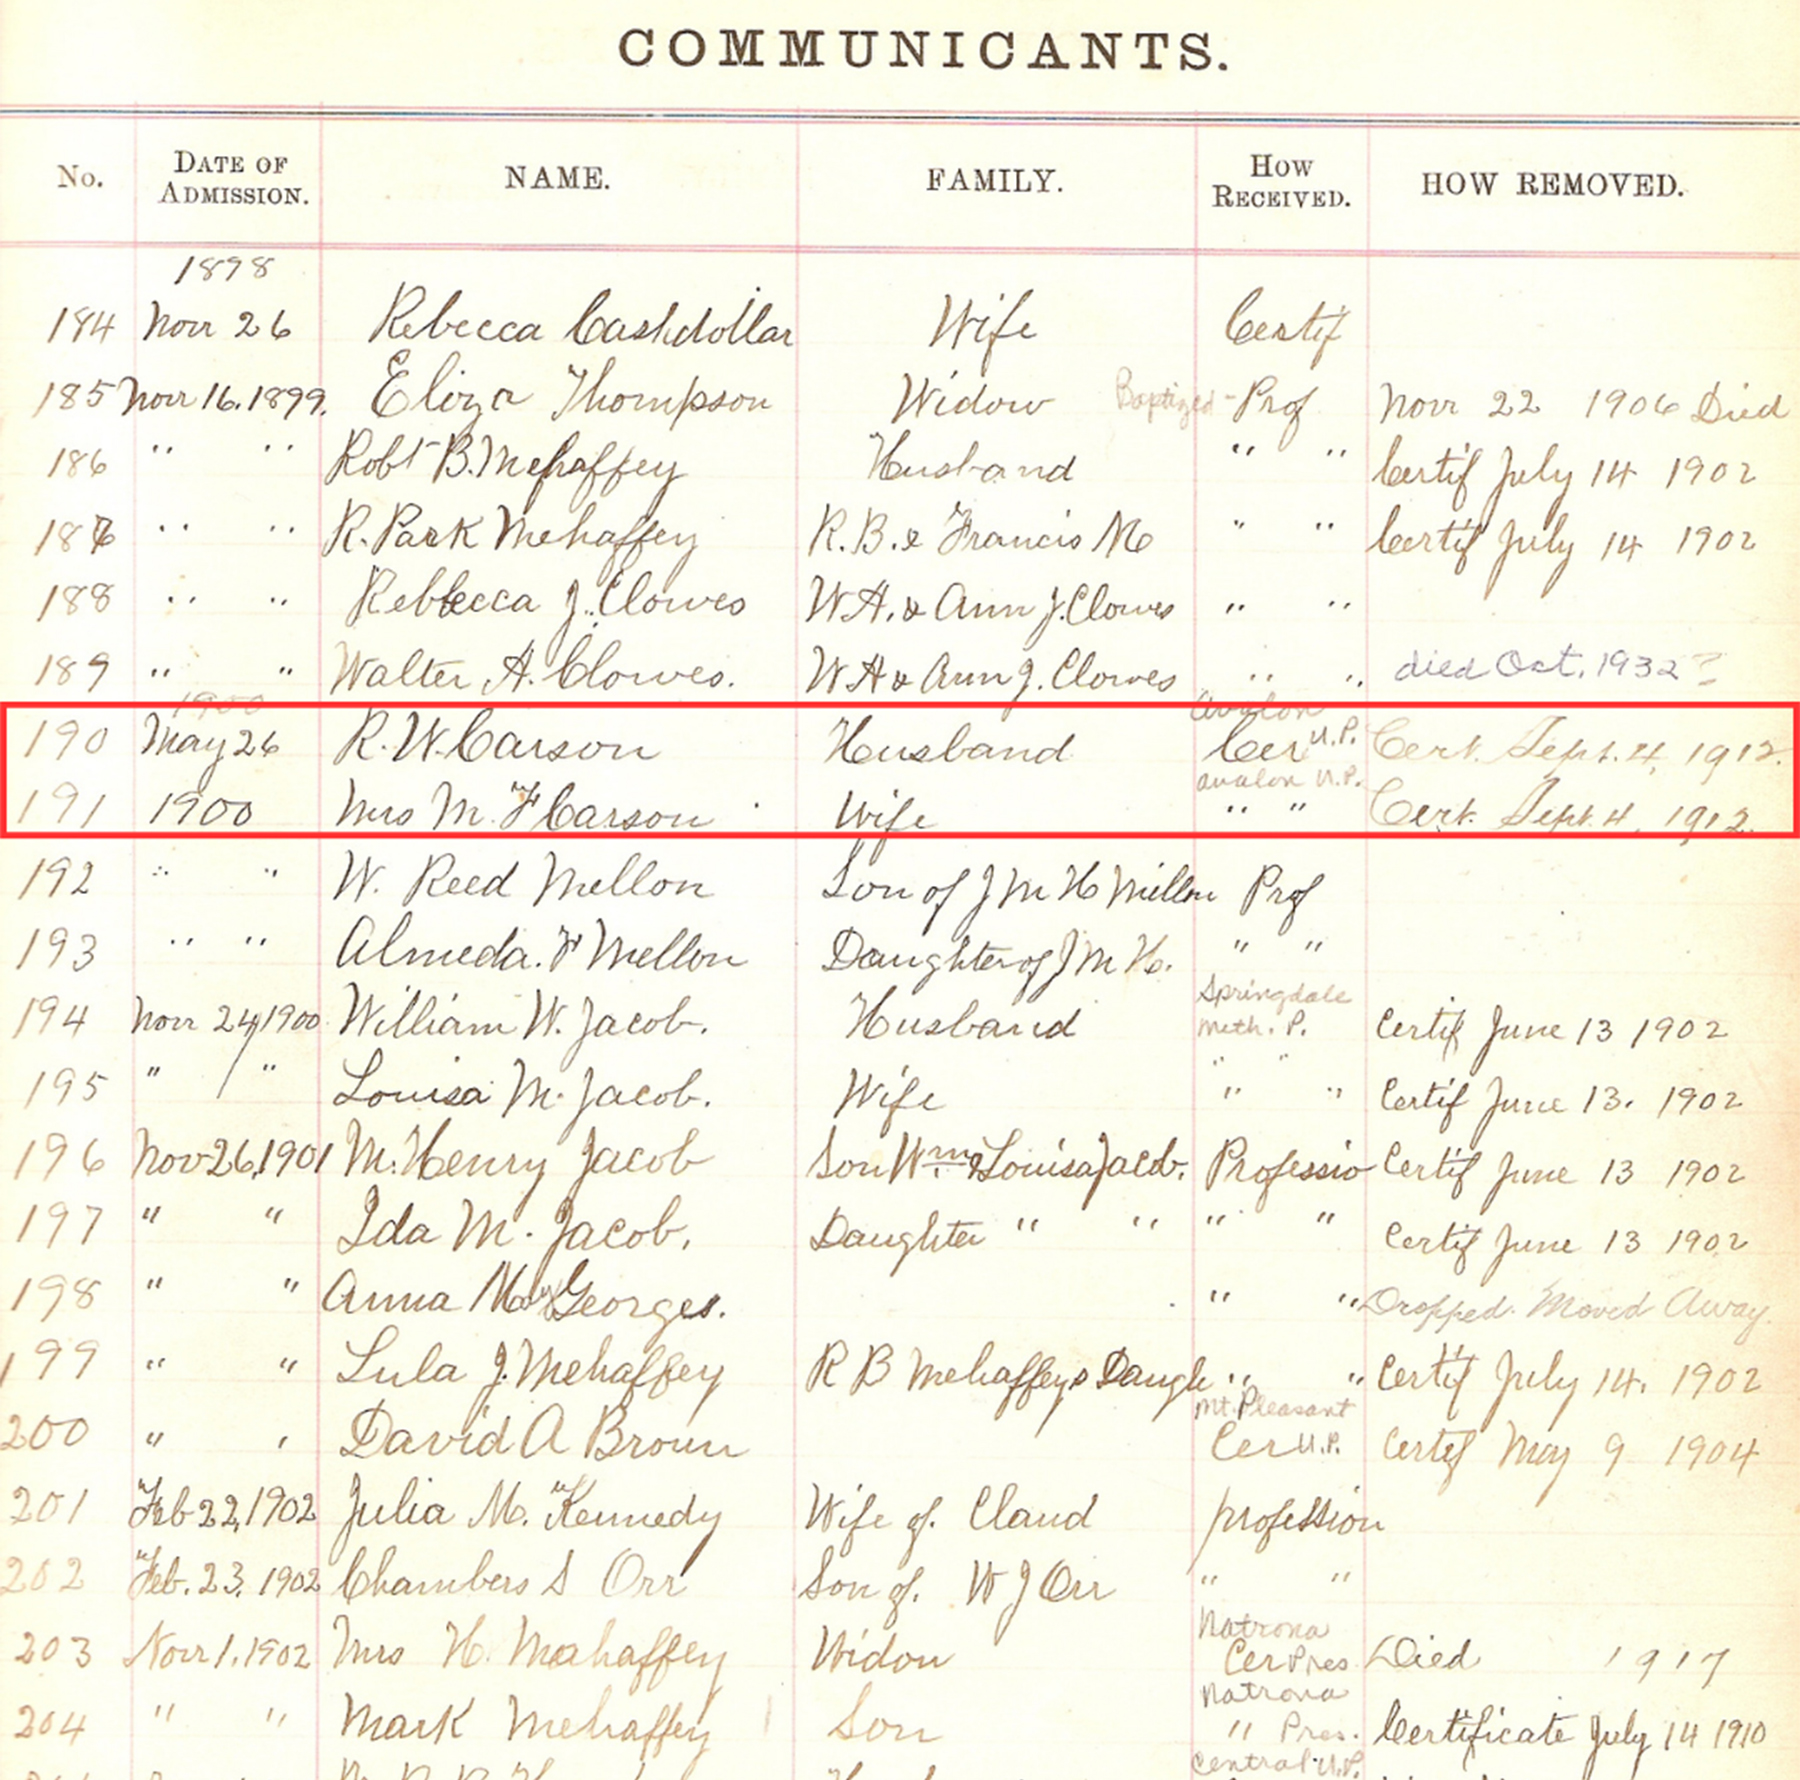 Springdale United Presbyterian Church Communicants via Presbyterian Historical Society records. Robert & Maria Carson’s entry is squared in red. 